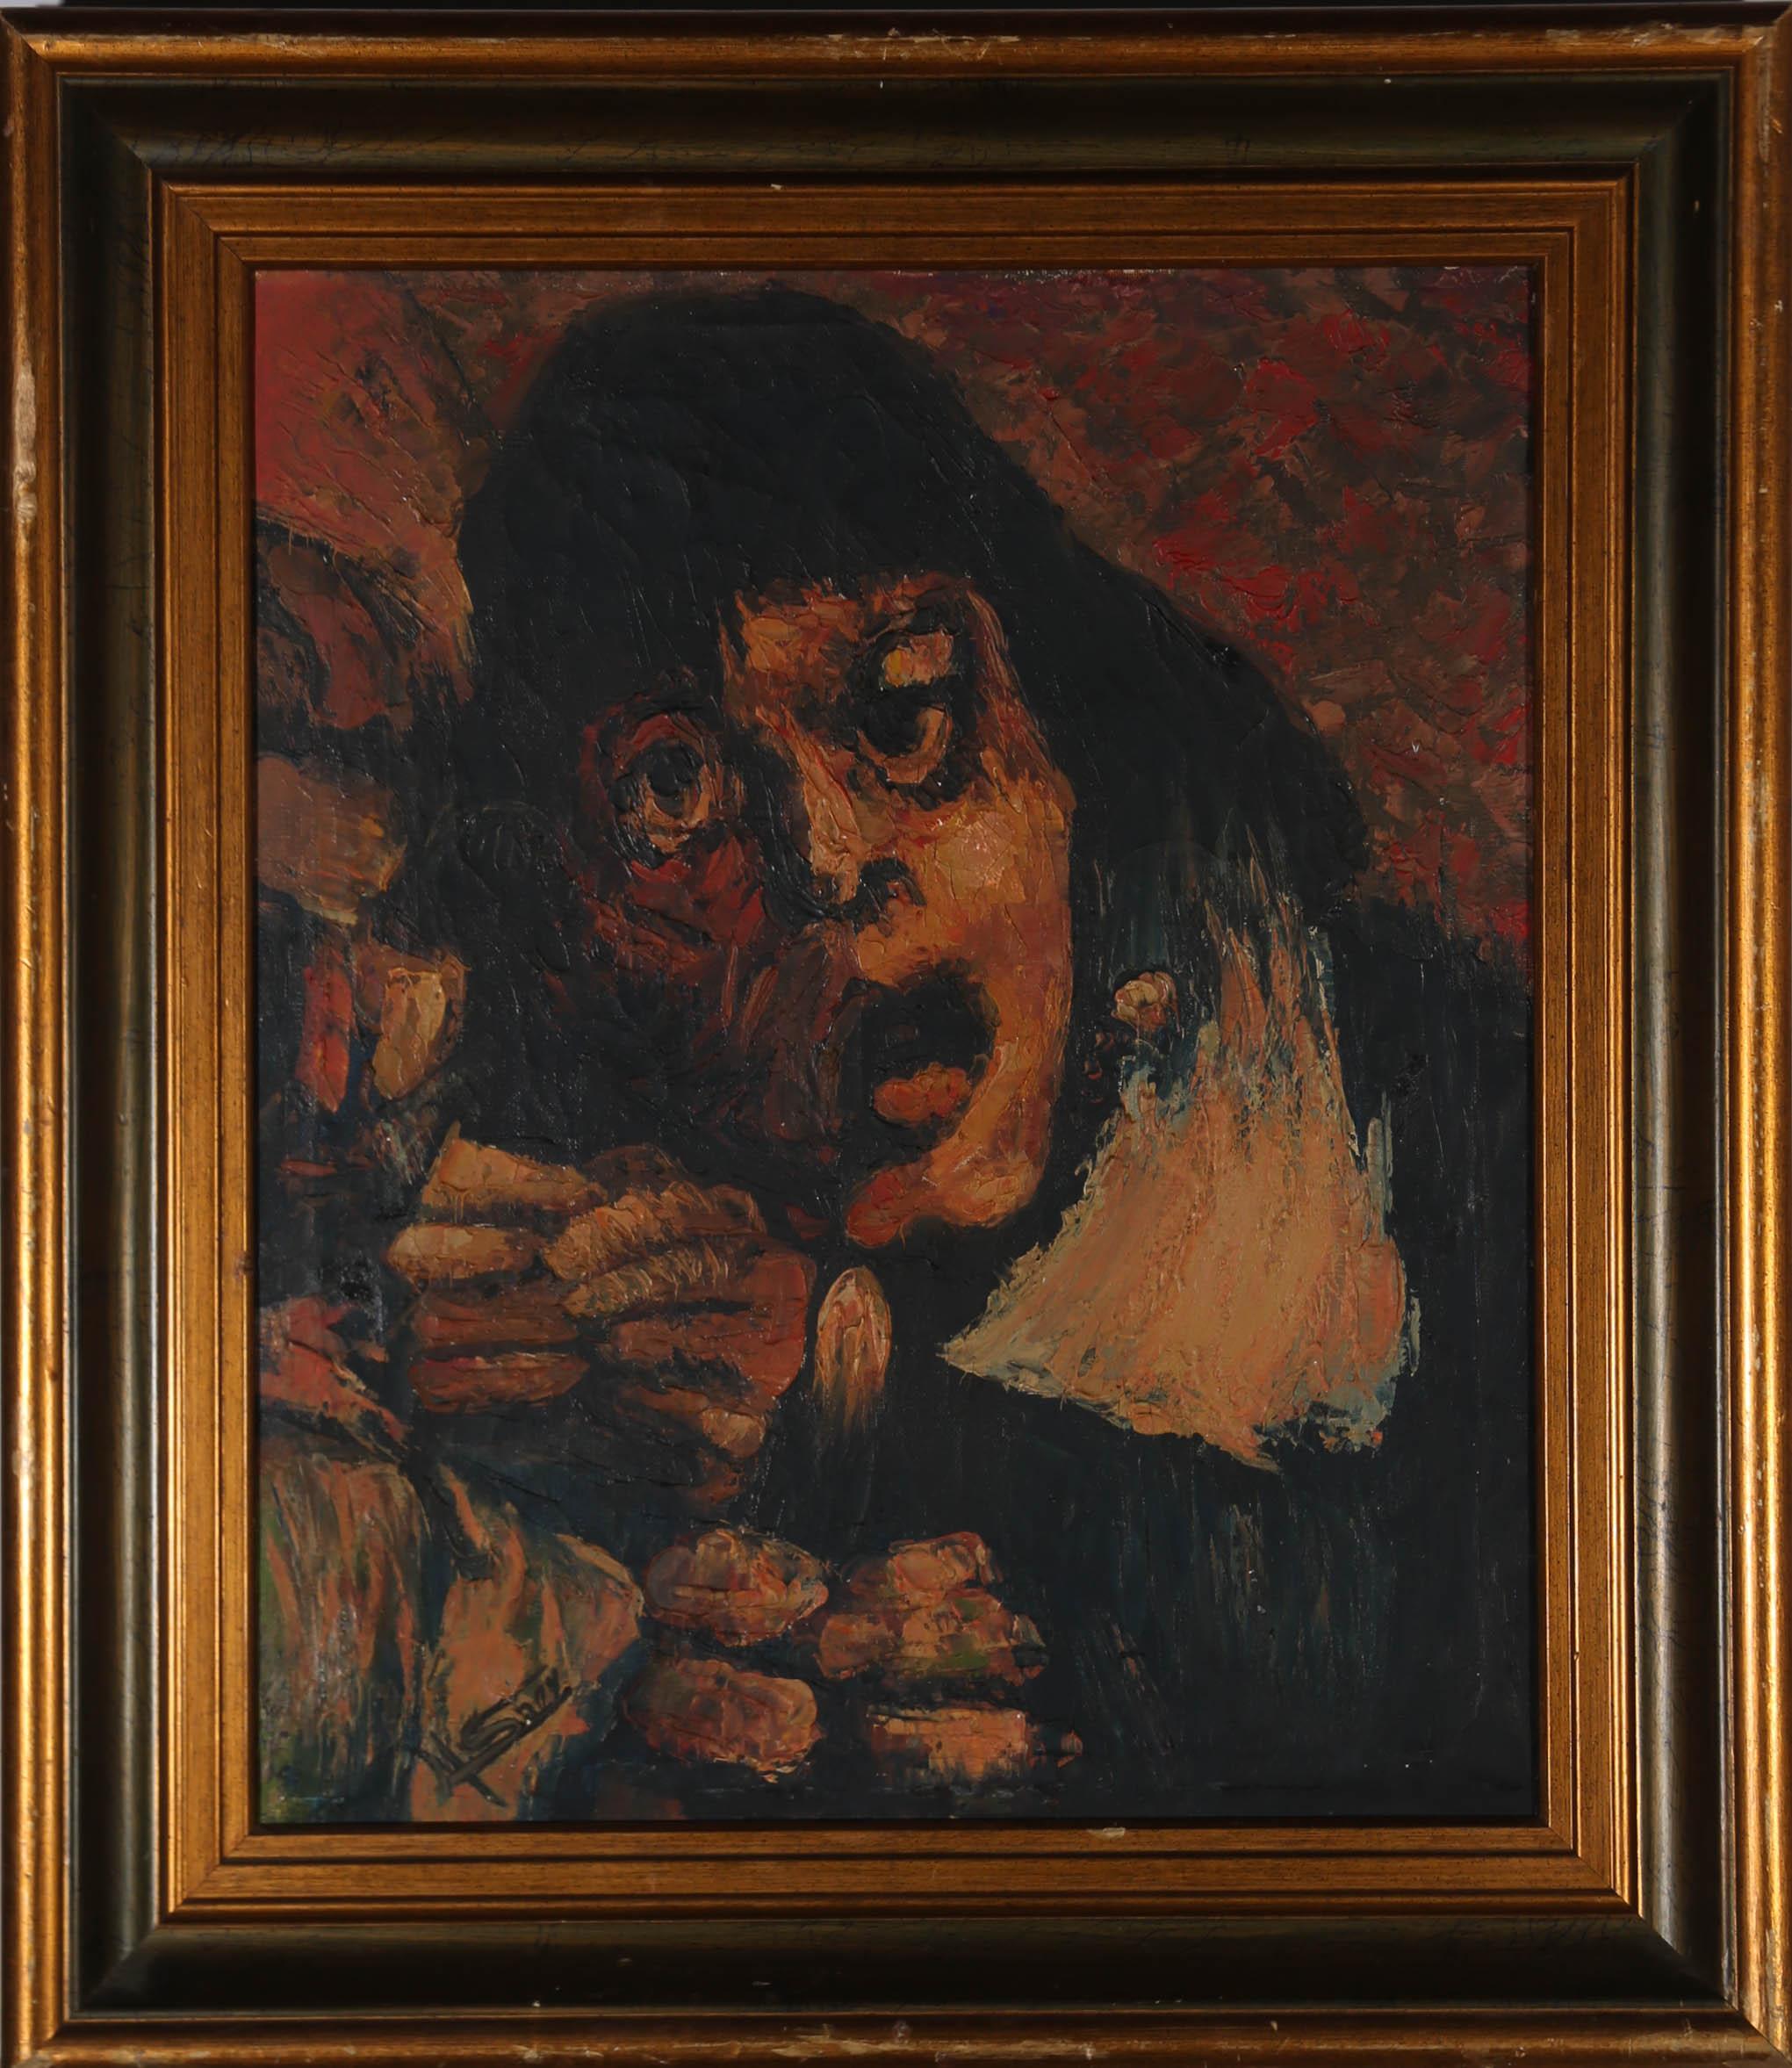 Unknown Portrait Painting - Mid 20th Century Oil - Shock Horror